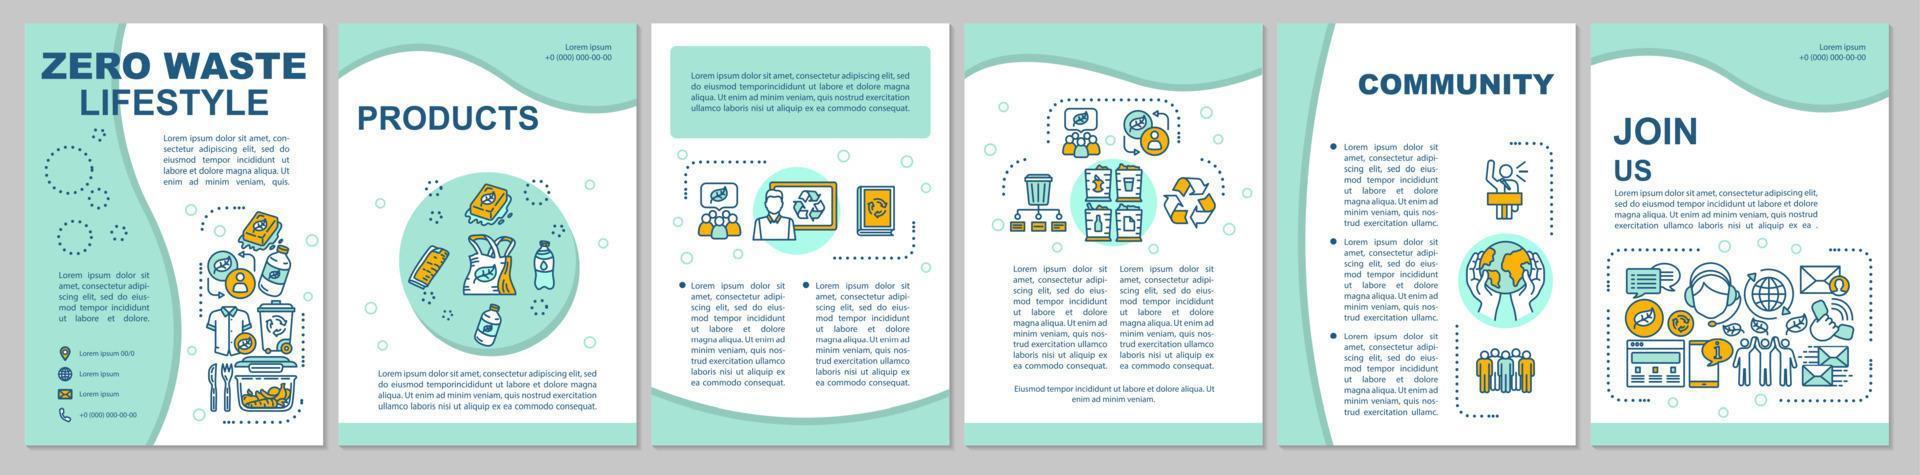 Zero waste lifestyle brochure template layout. Flyer, booklet, leaflet print design with linear illustrations. Waste management Vector page layouts for magazines, annual reports, advertising posters